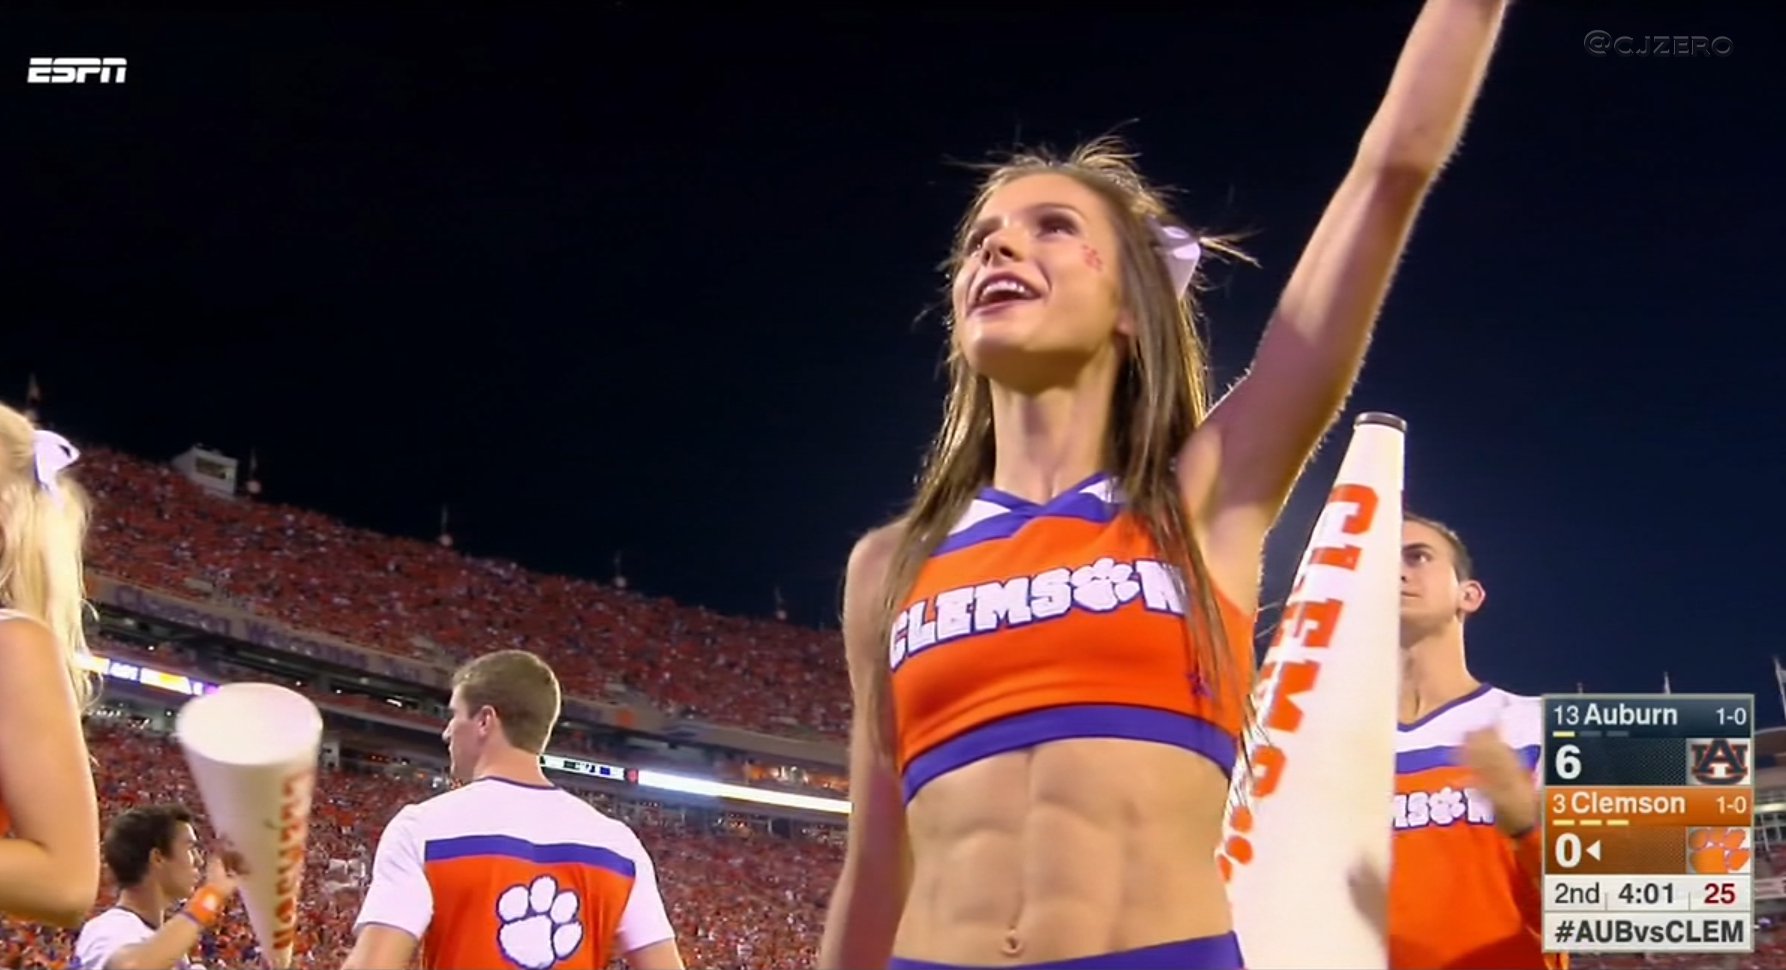 “I need this Clemson cheerleader's ab workout ASAP (r @rys1324)” .